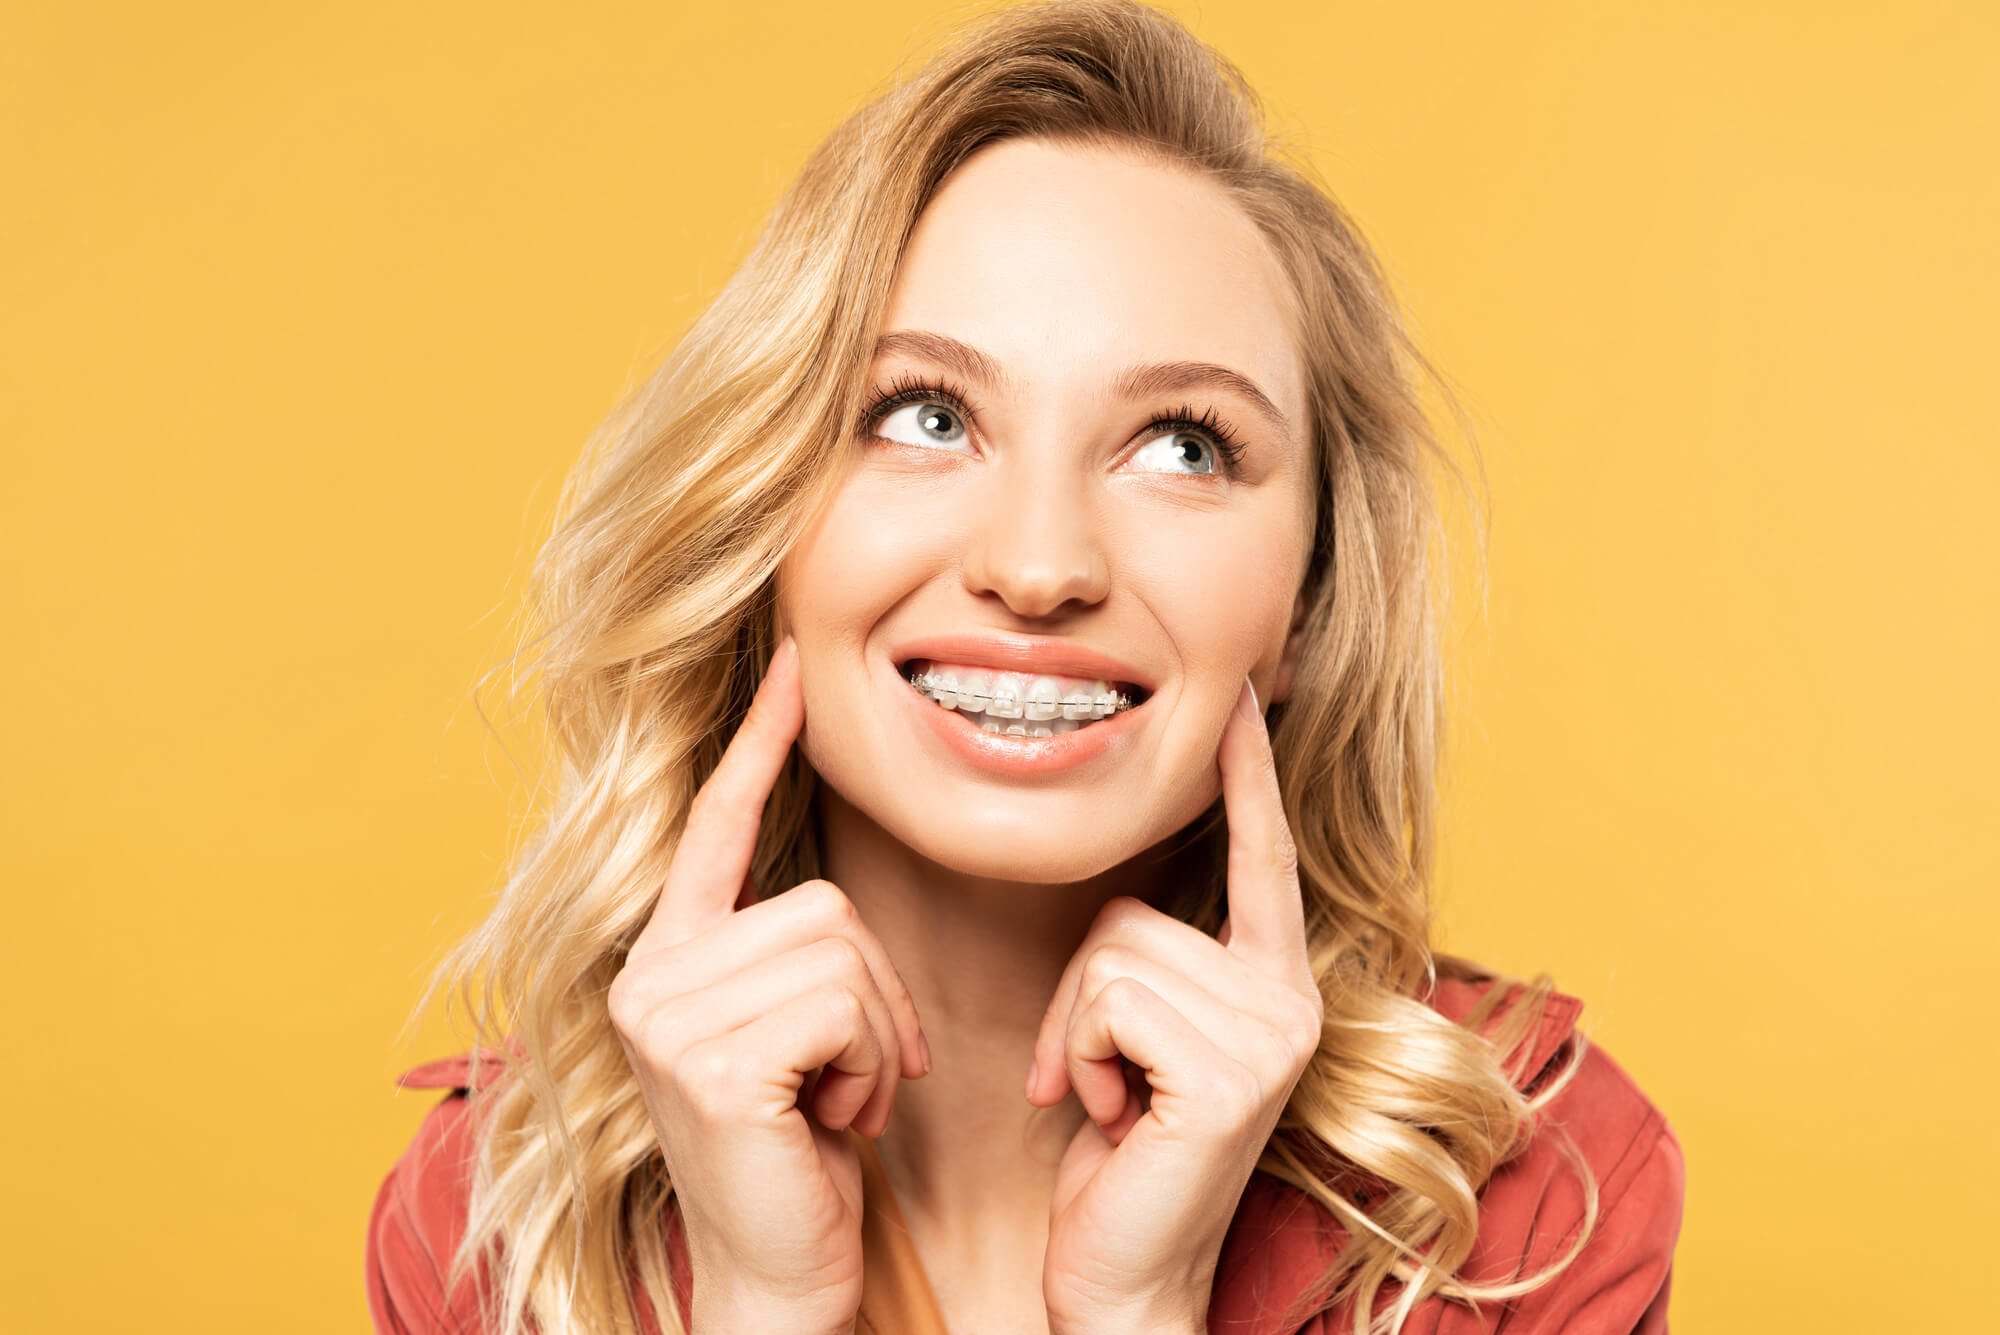 where is the best cosmetic dentist in port st lucie?